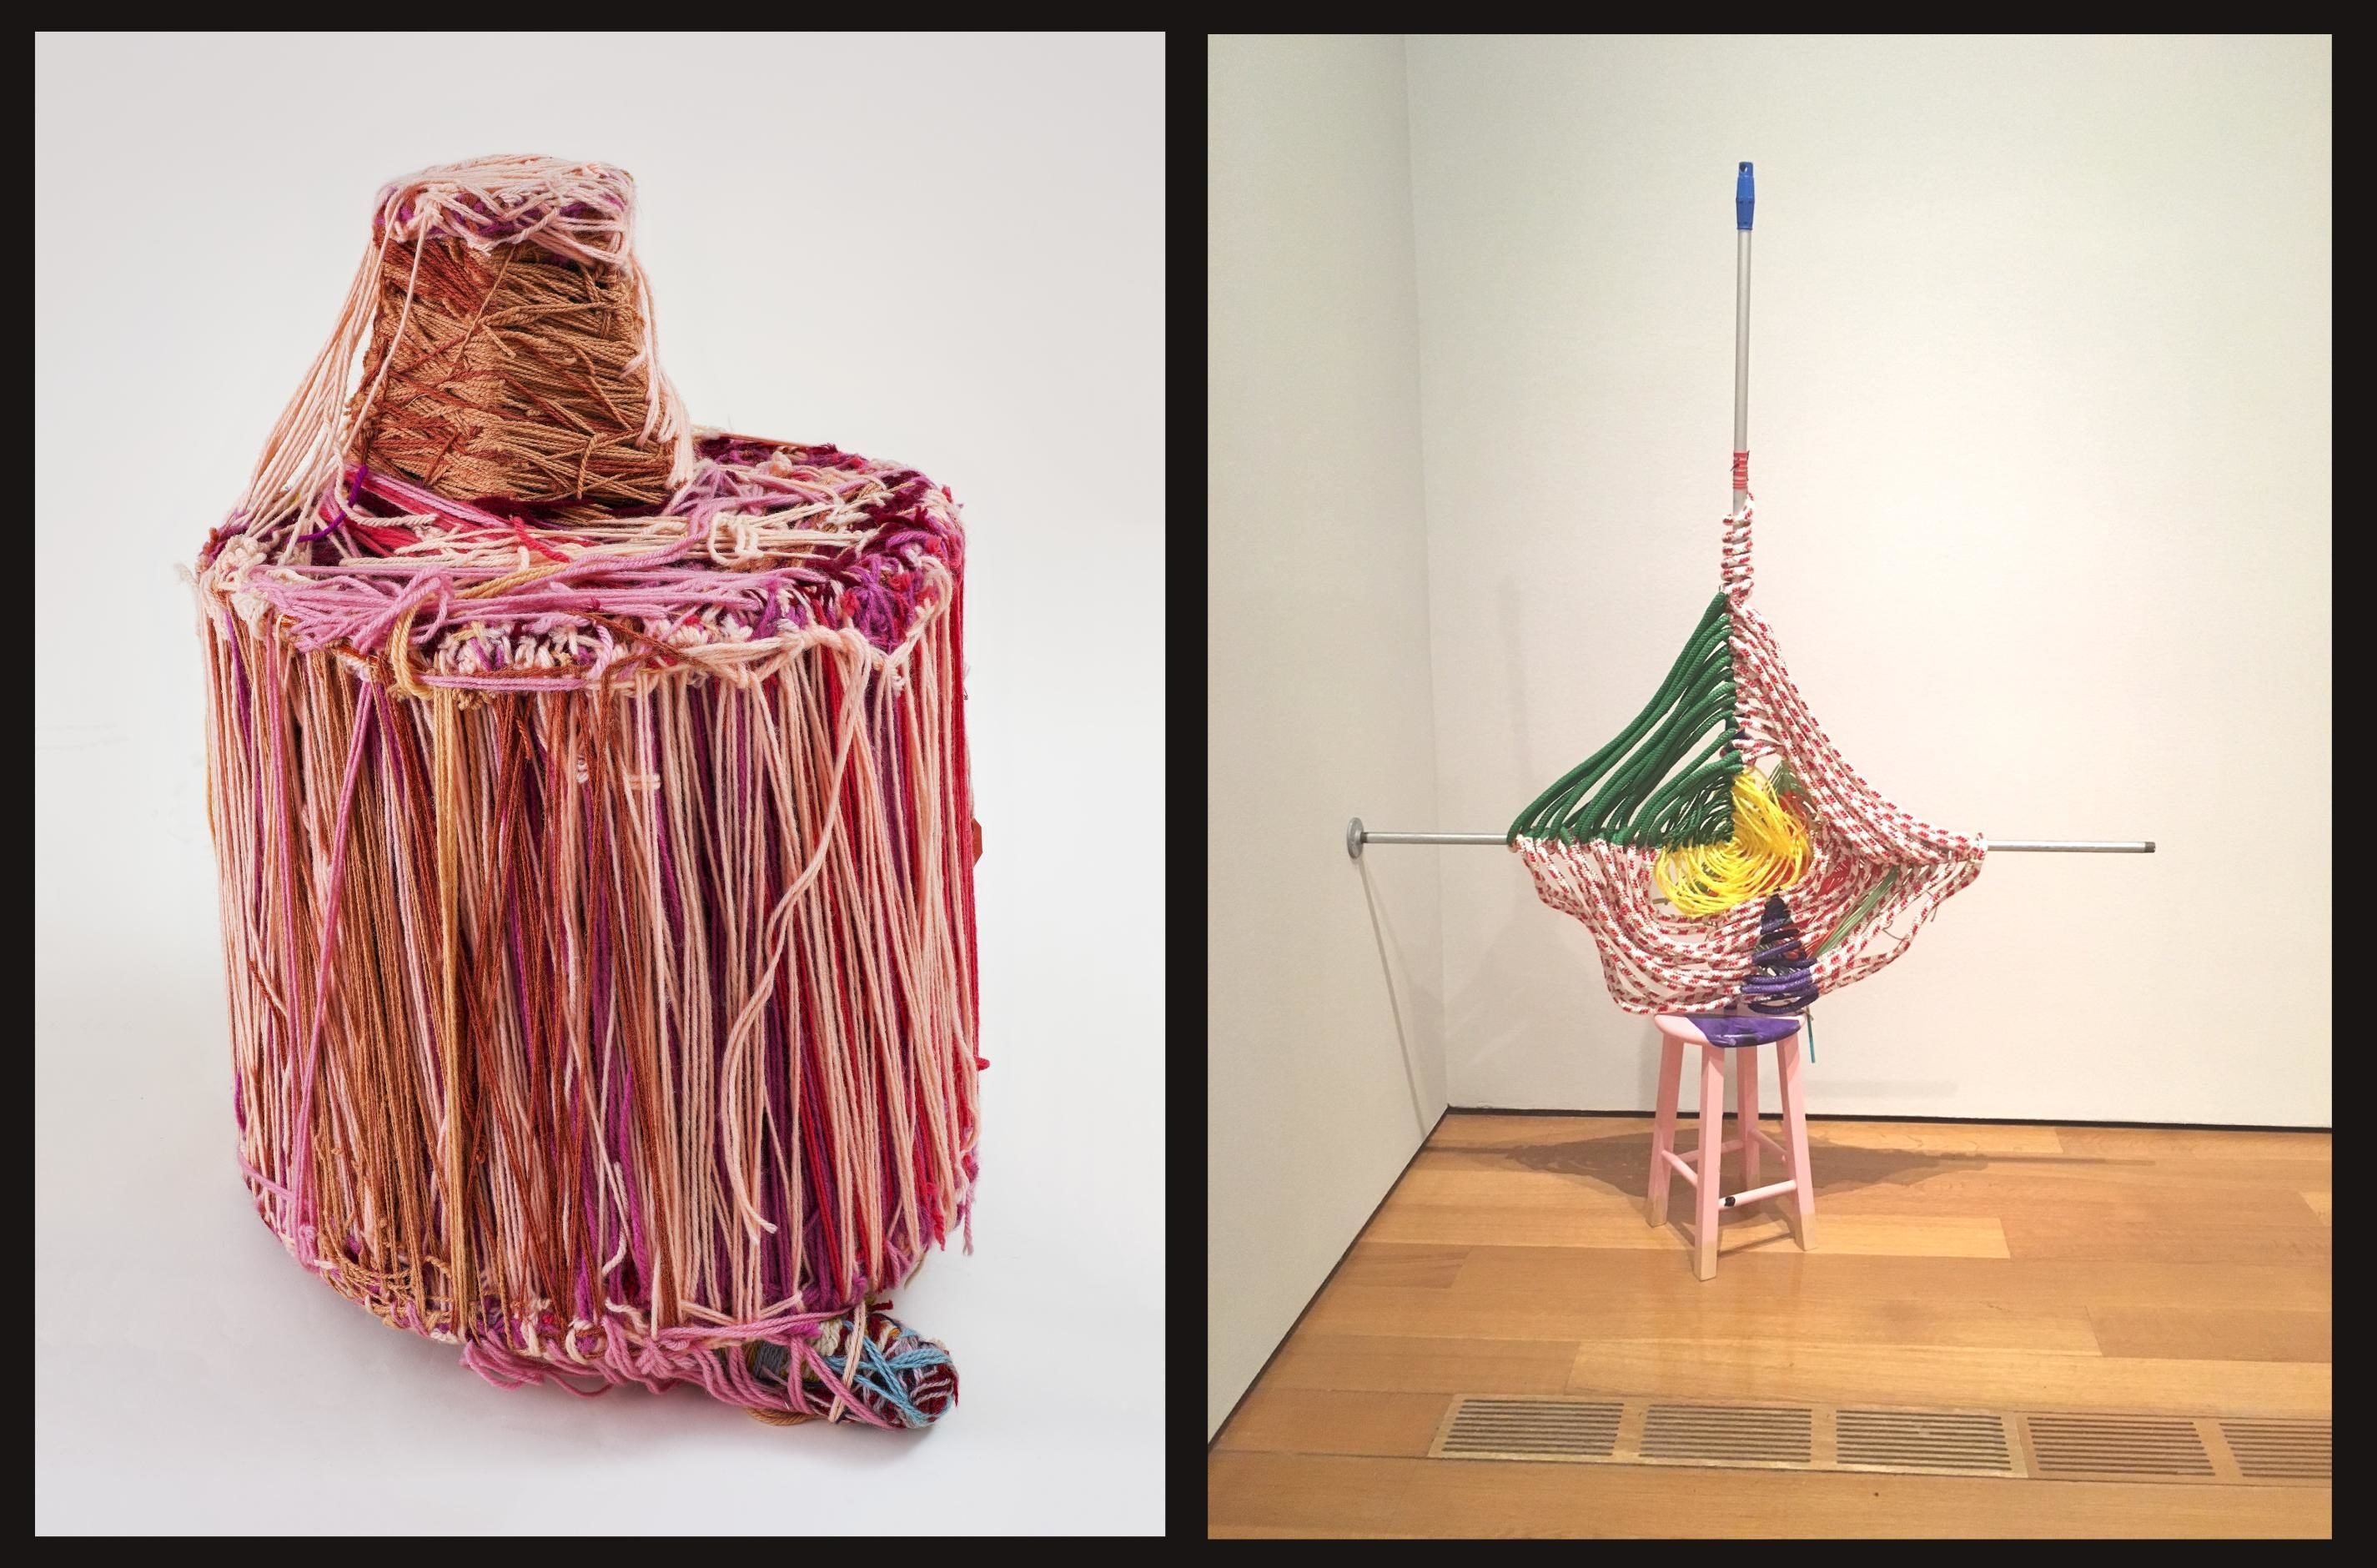 An object bound in pink yarn by the artist Judith Scott, and a sculpture by Jessica Stockholder using colorful nylon rope and metal rods on a pink stool